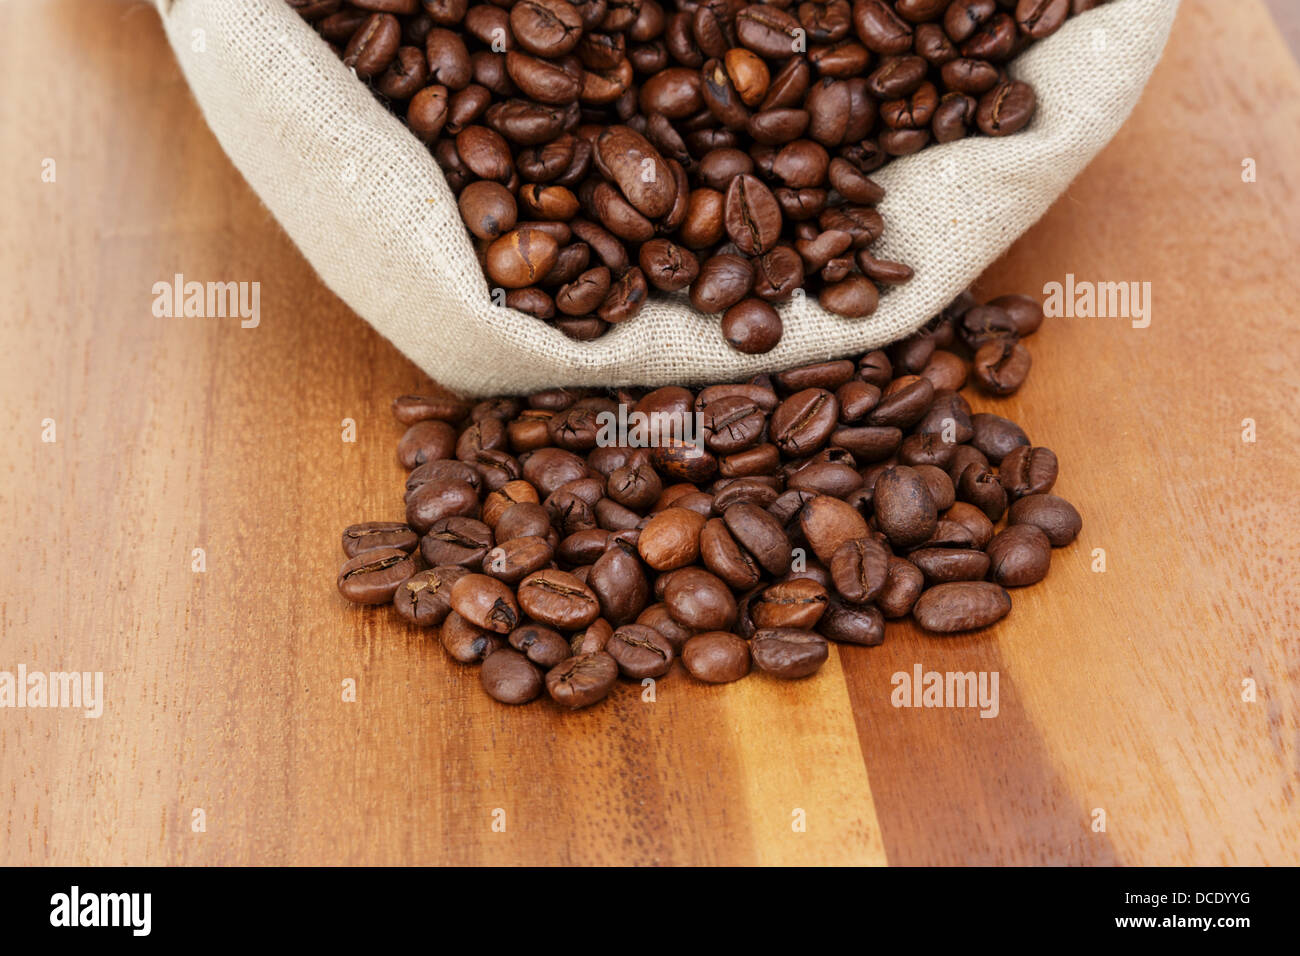 roasted coffee beans spill out of the bag, wooden table Stock Photo